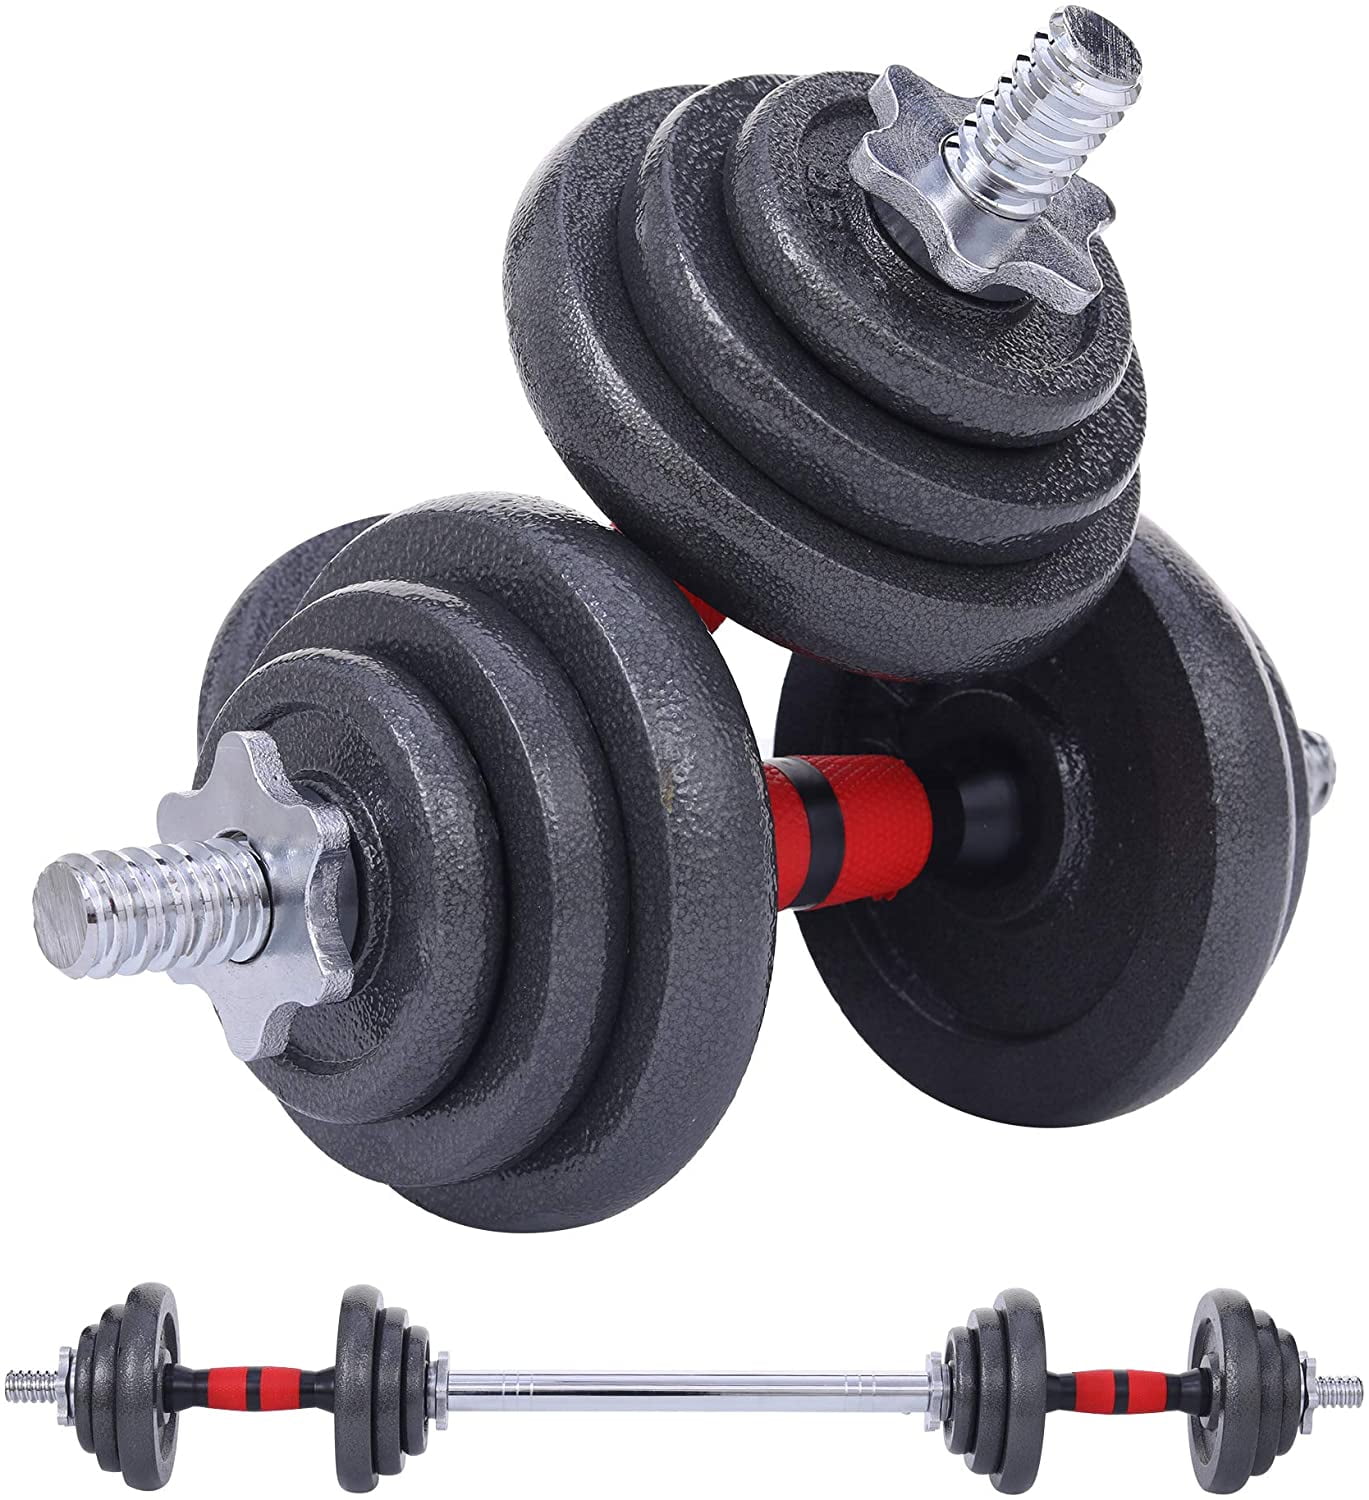 44 66 Lbs Details about   Detachble Fitness Round Dumbbells Barbell Plates Weight Lifting 22 